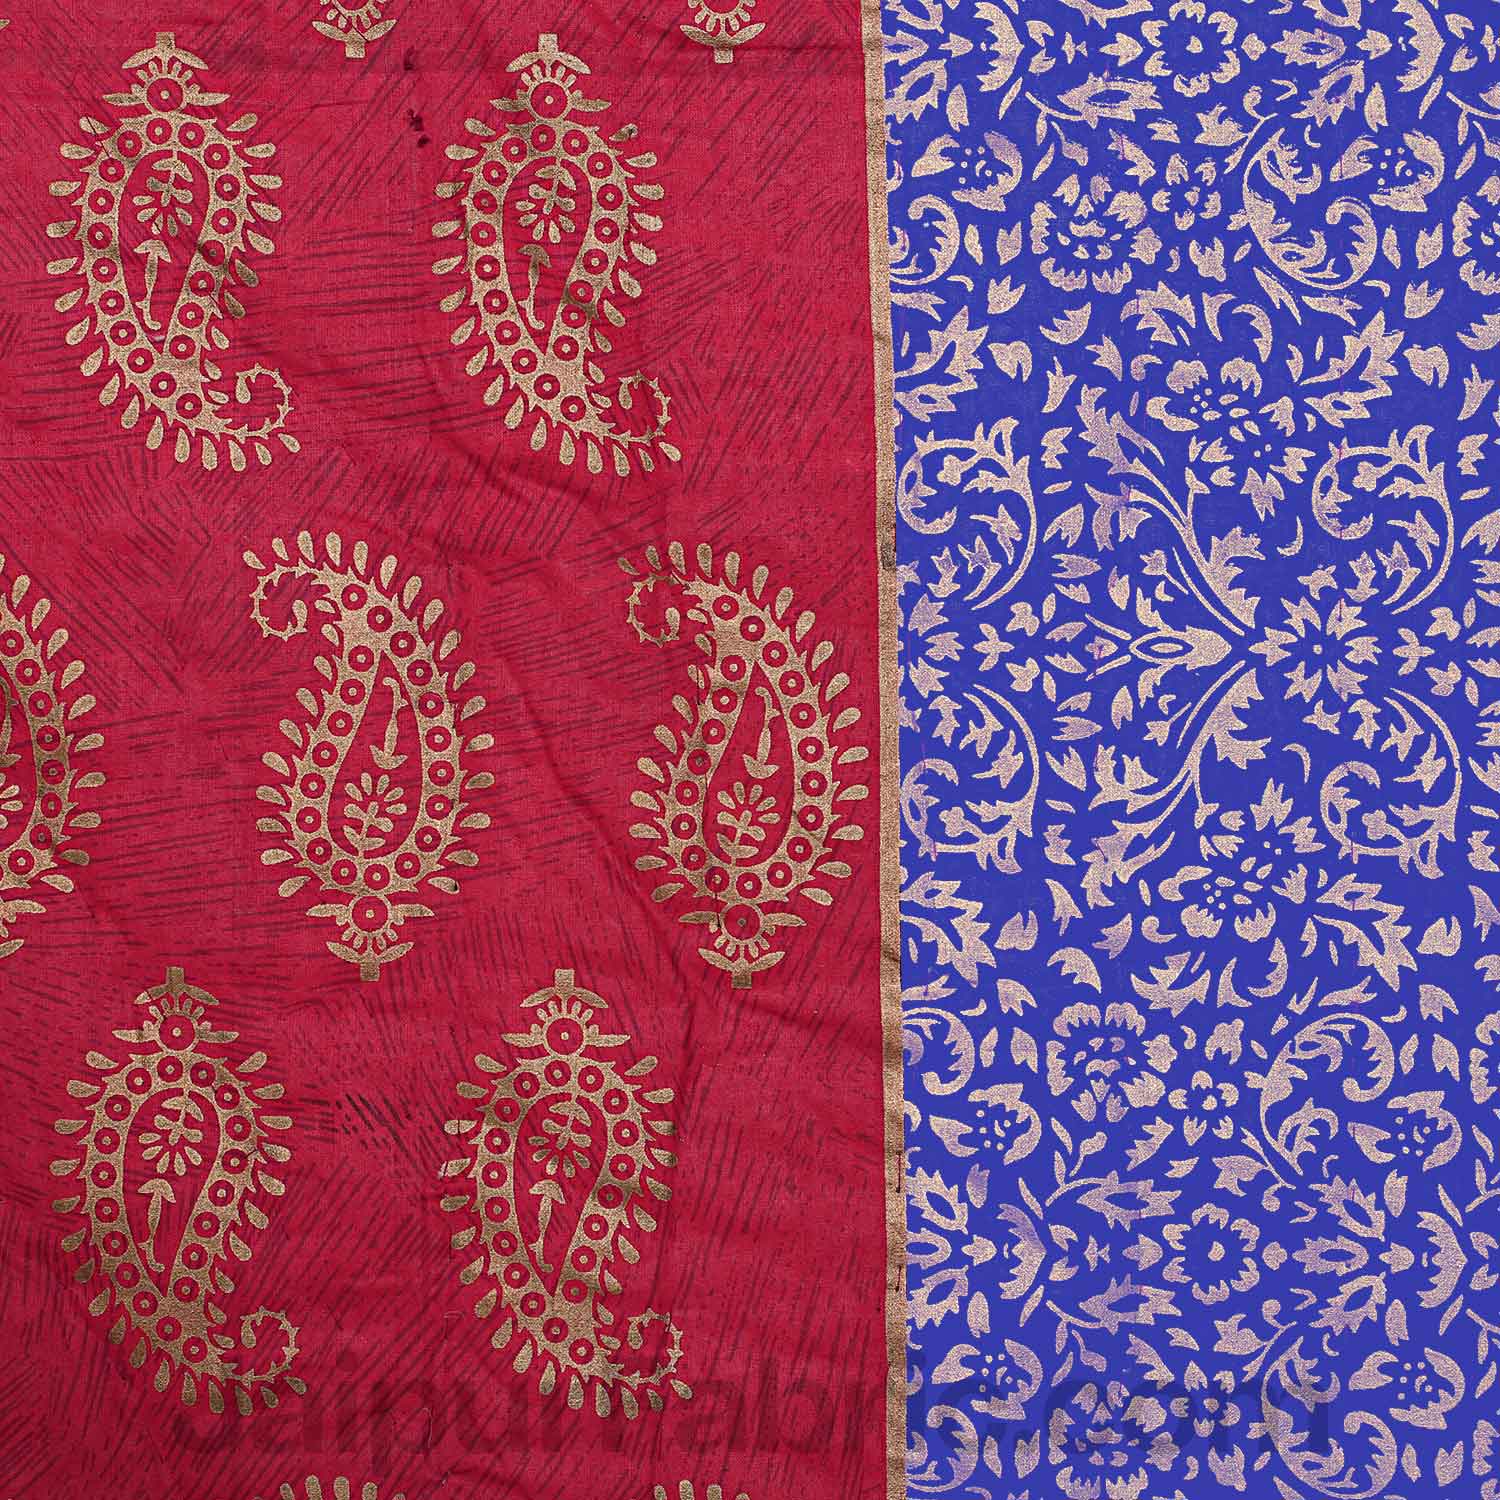 Jaipuri Printed Double Bed Razai Golden Red and blue with Paisley pattern